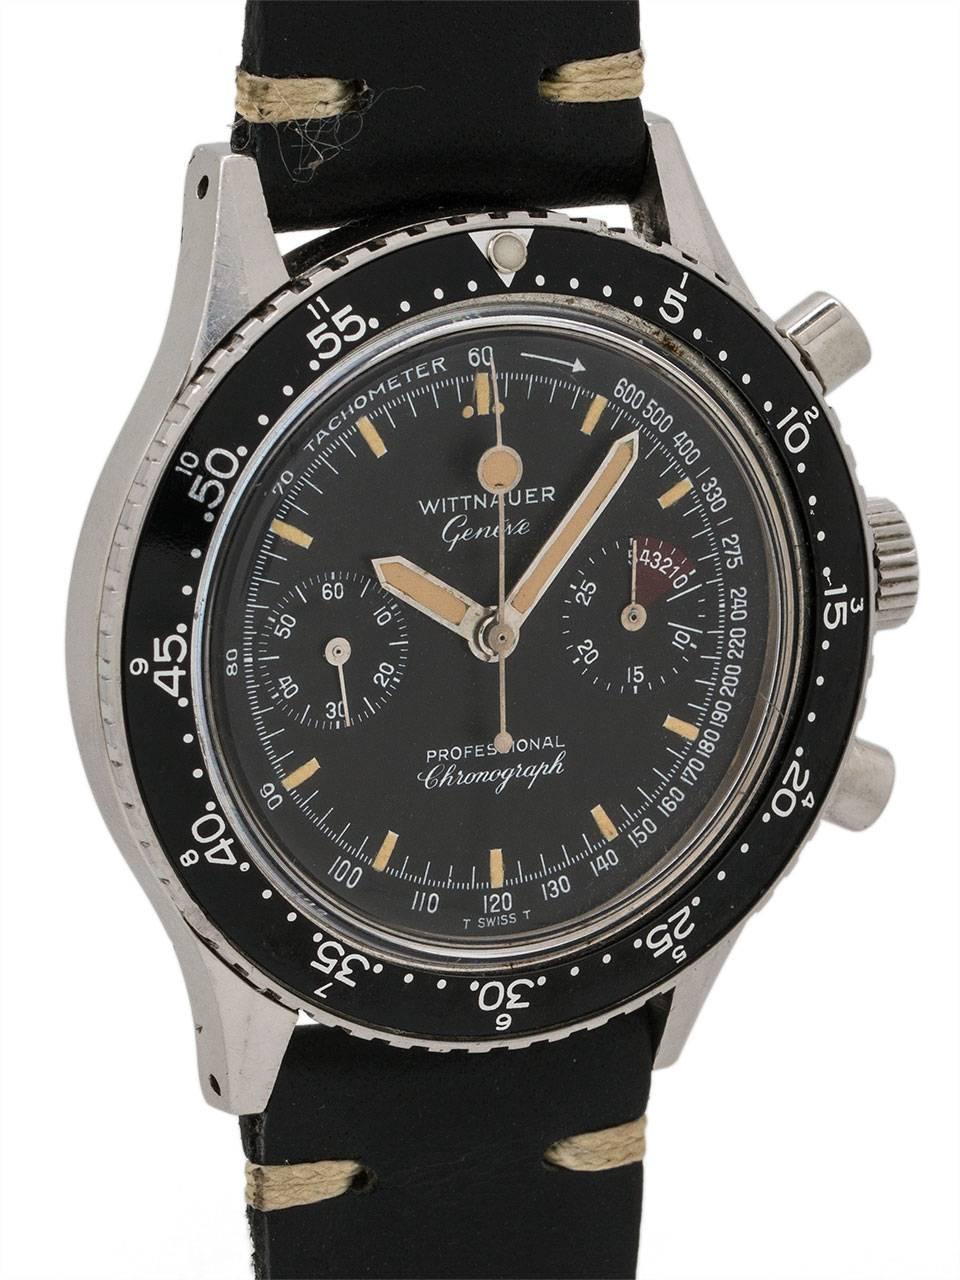 Wittnauer Geneve Stainless Steel Professional Chronograph circa 1960s. Featuring large 41 X 47mm case with screw down back, wide black elapsed time bezel, acrylic crystal and round chronograph pushers. Very pleasing black original dial with patina’d